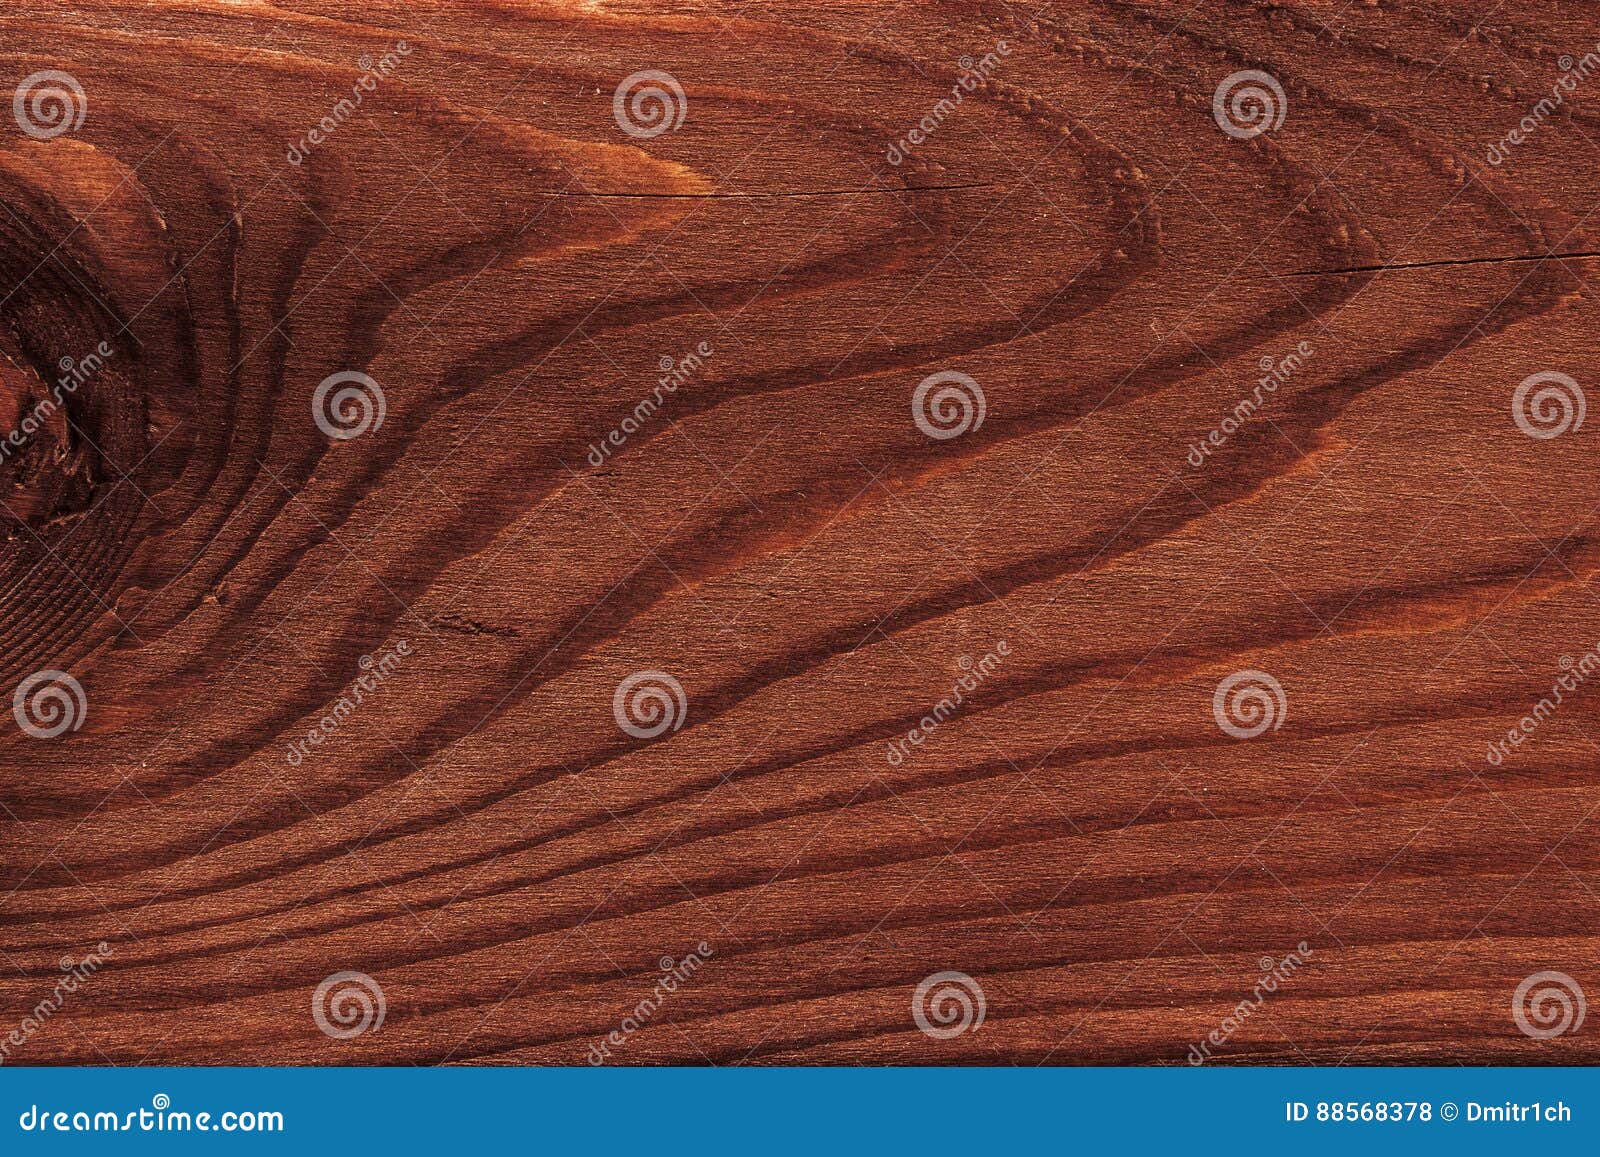 Old Wooden Table Top High Resolution Texture Stock Photo Image Of Hardwood Texture 5678